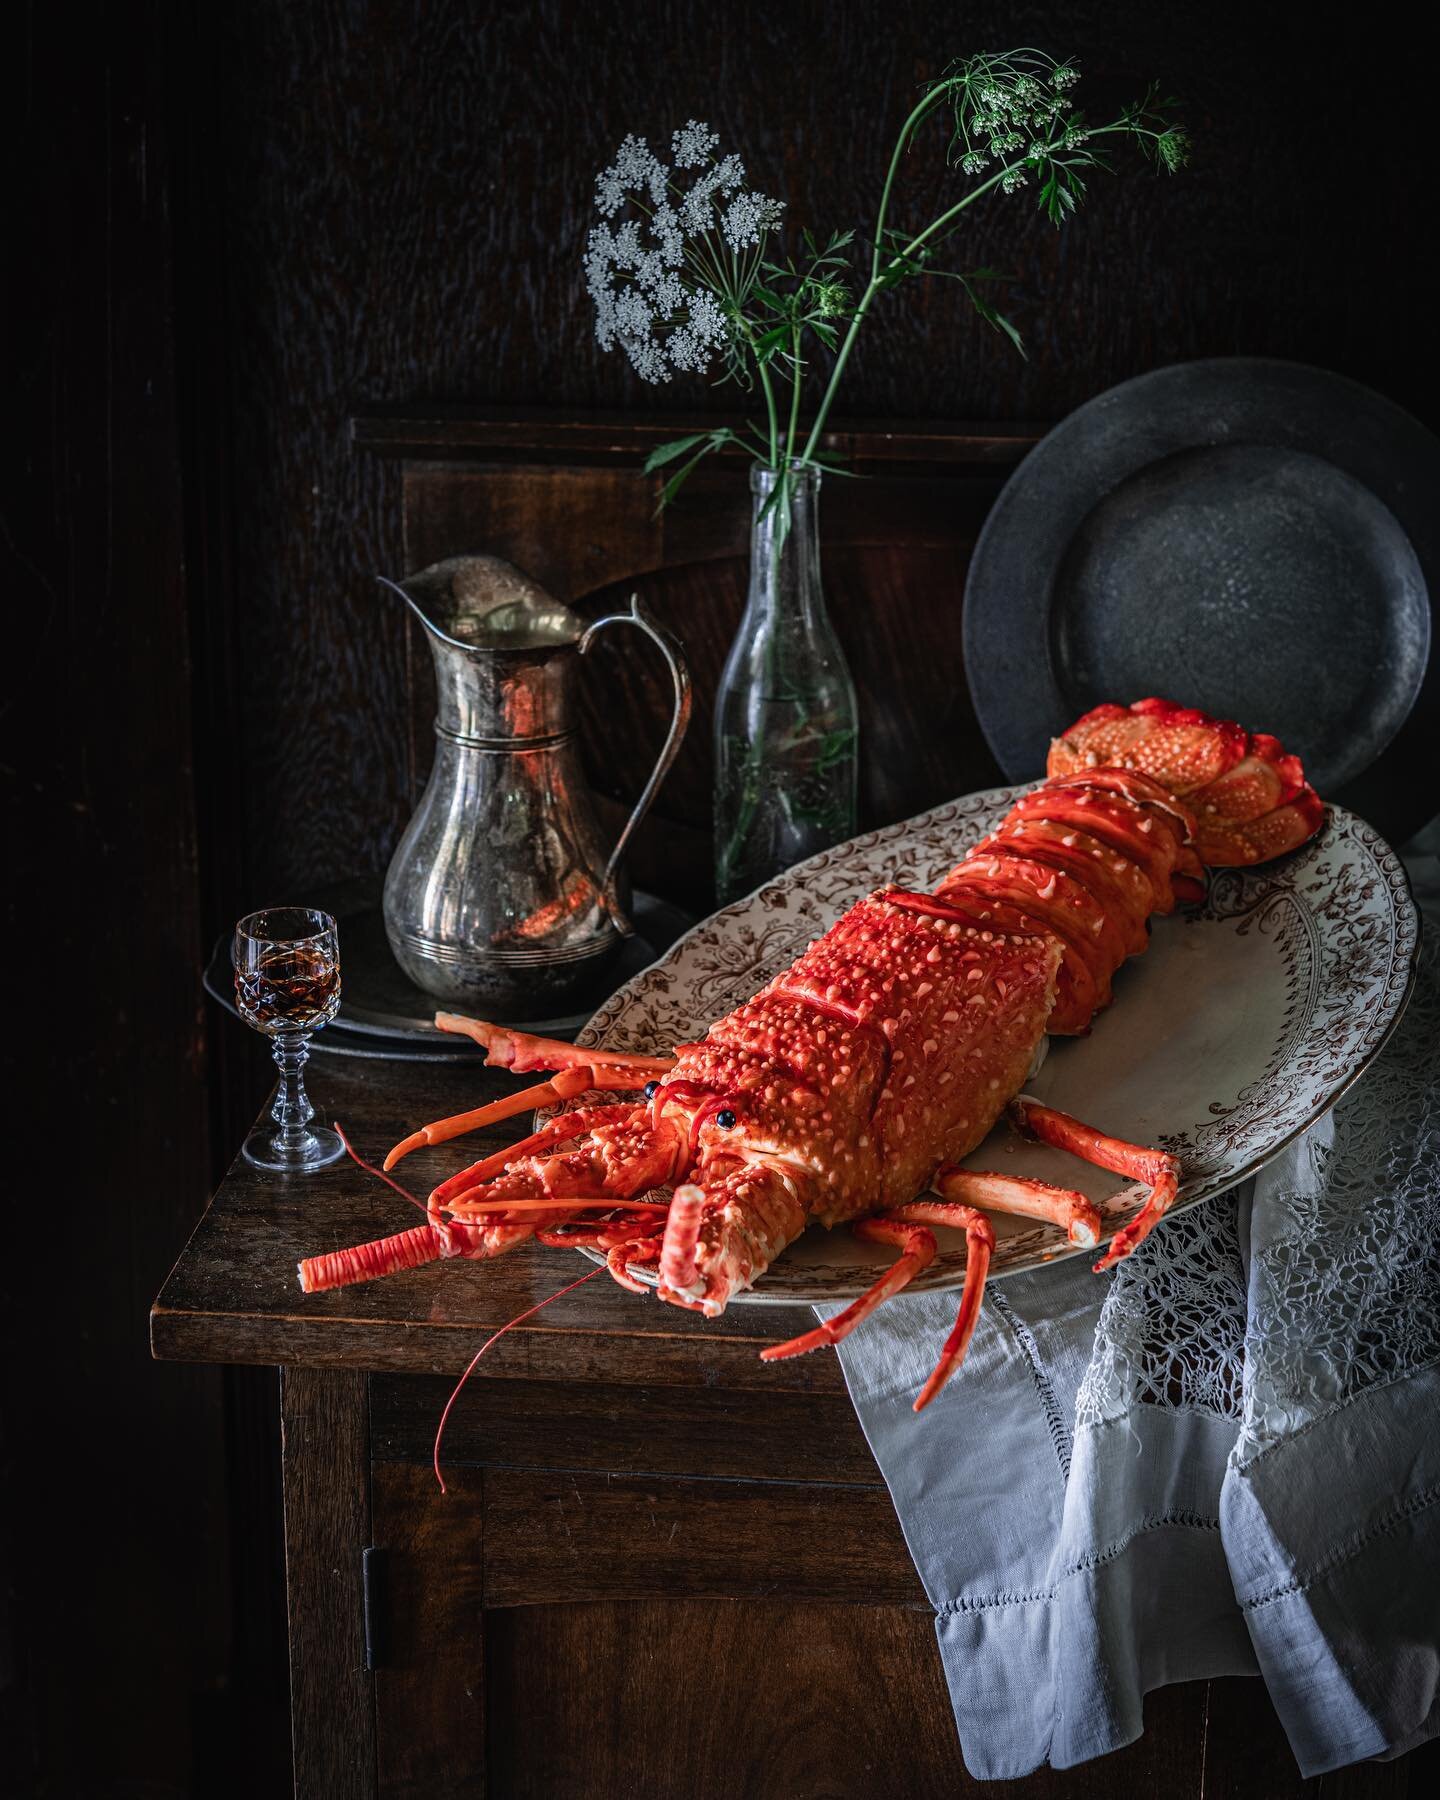 In the heat and humidity of the hiatus between Xmas and New Year this Gingerbread and chocolate Crayfish has slowly fallen apart. I&rsquo;ve taken a little moody capture before we completely demolish him- though you may already notice some missing le